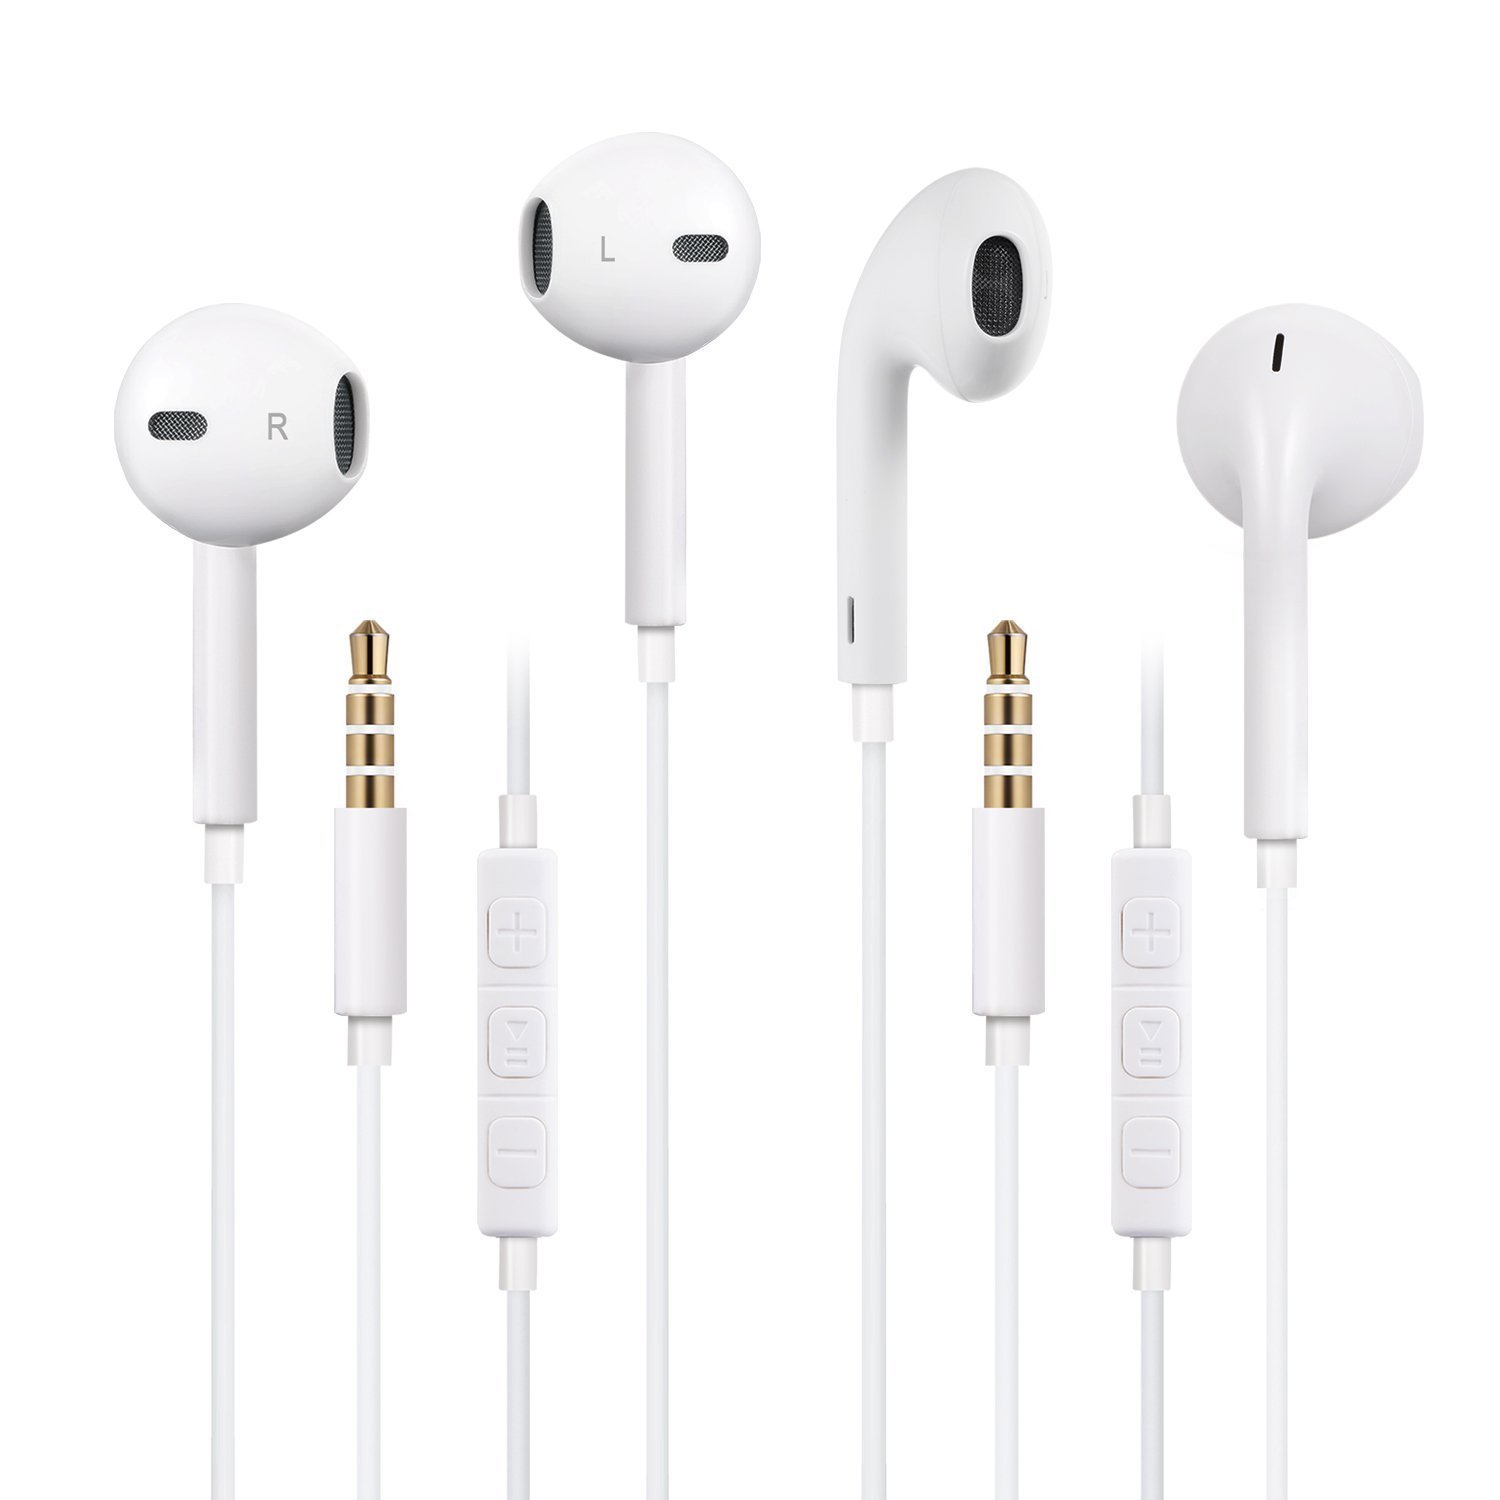 Vicartor Earphones 2Pack Earbuds/Headphones/Headsets with Remote Control and Mic Fully Compatible with iPhone